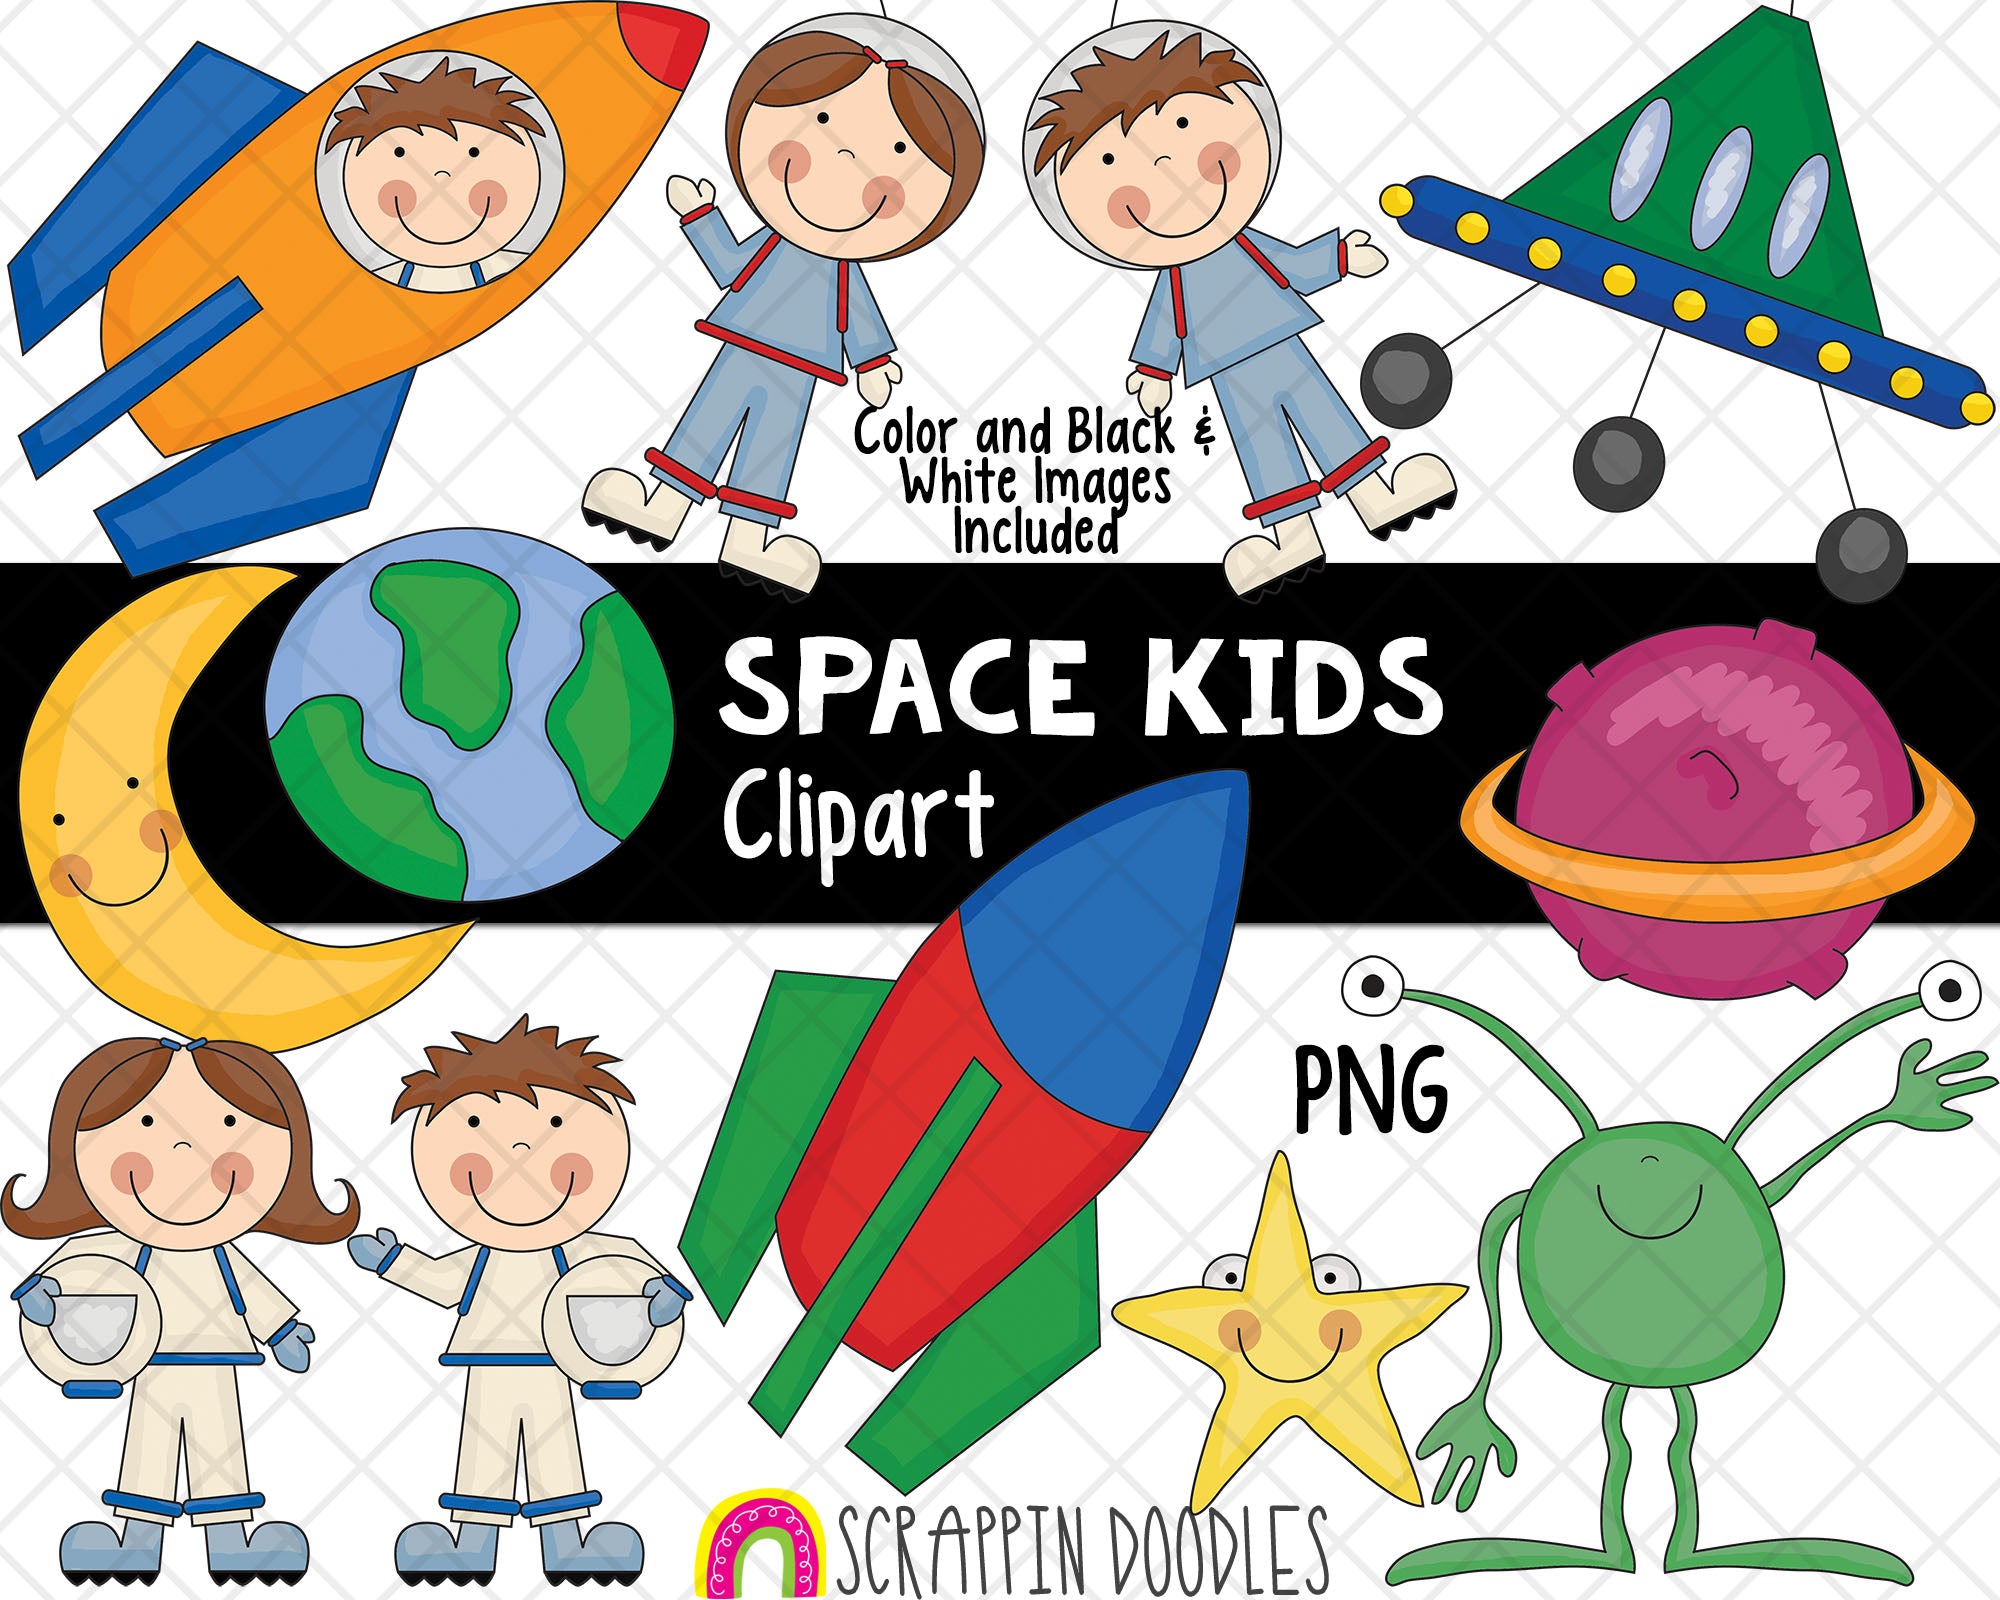 astronaut in space clipart